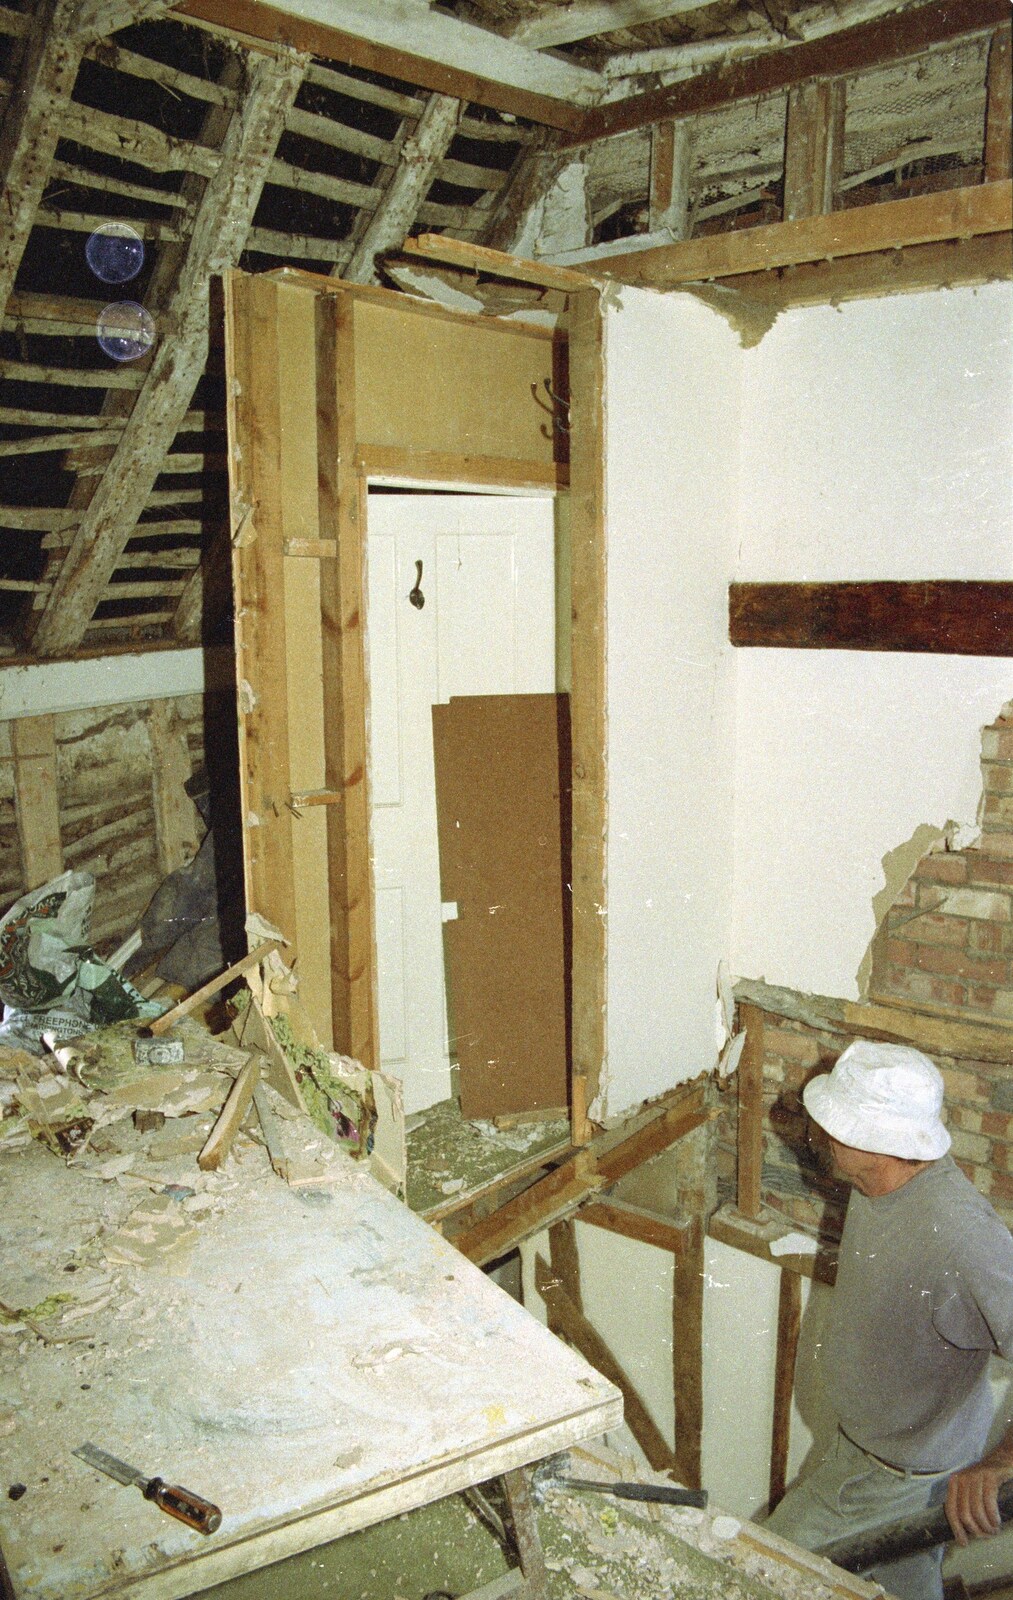 An old door hangs by itself from Hale-Bopp and Bedroom Demolition, Brome, Suffolk - 10th May 1997